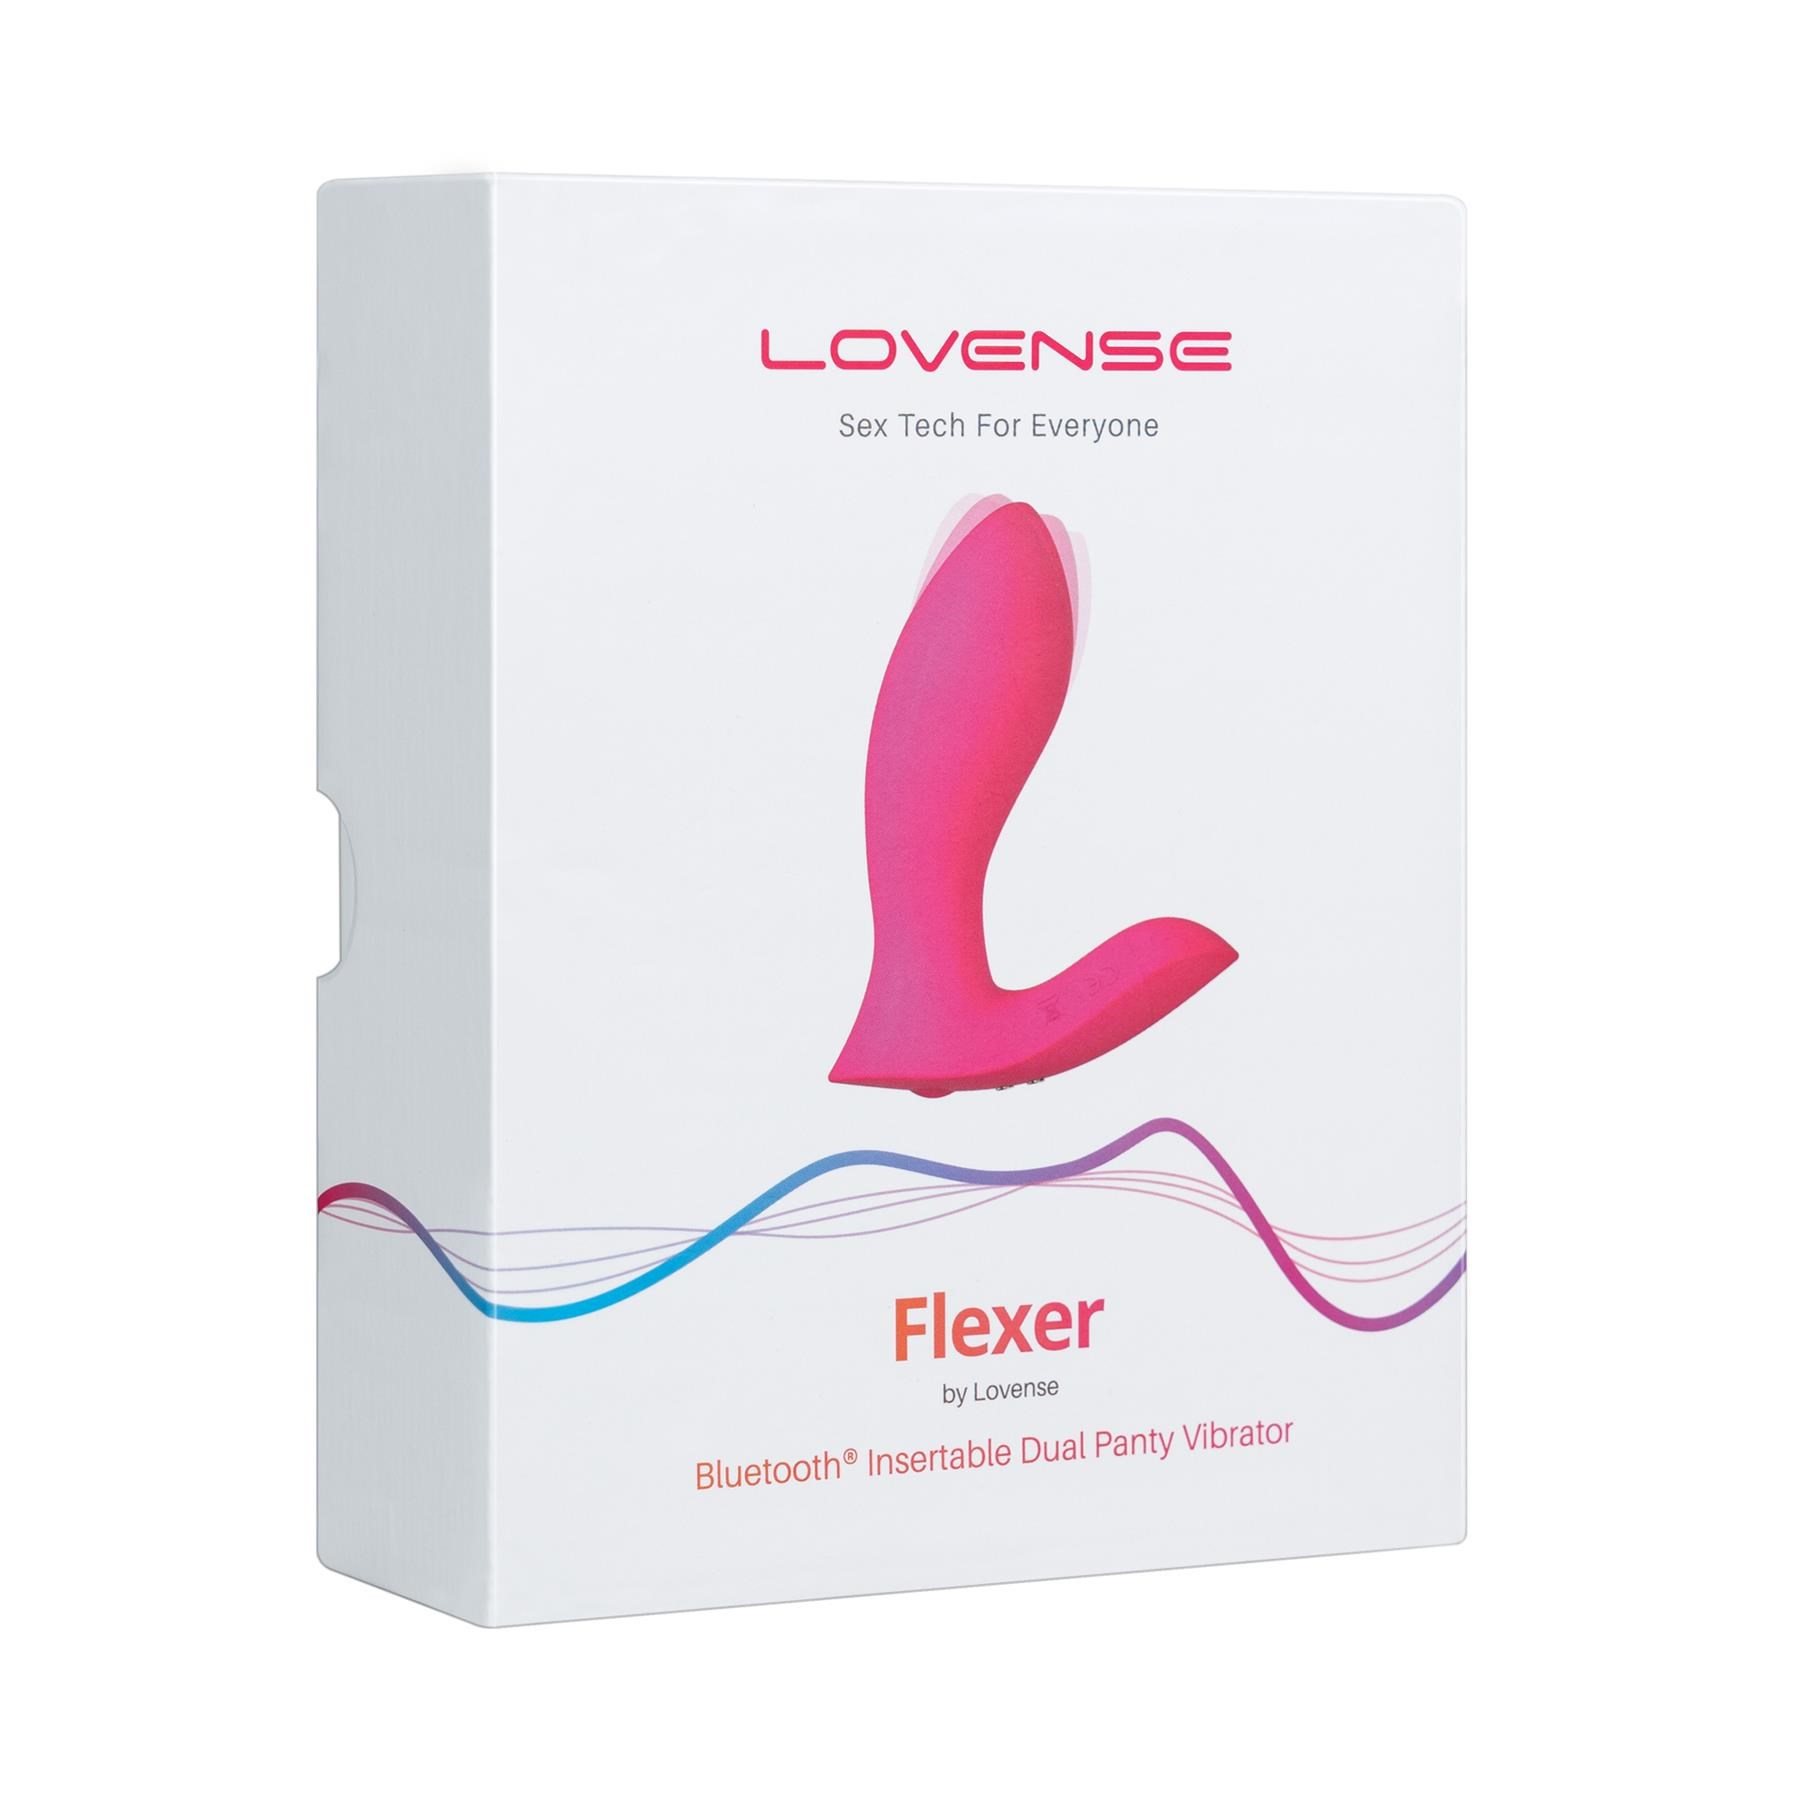 Lovense Bluetooth Flexer Come Hither Vibrator - Packaging